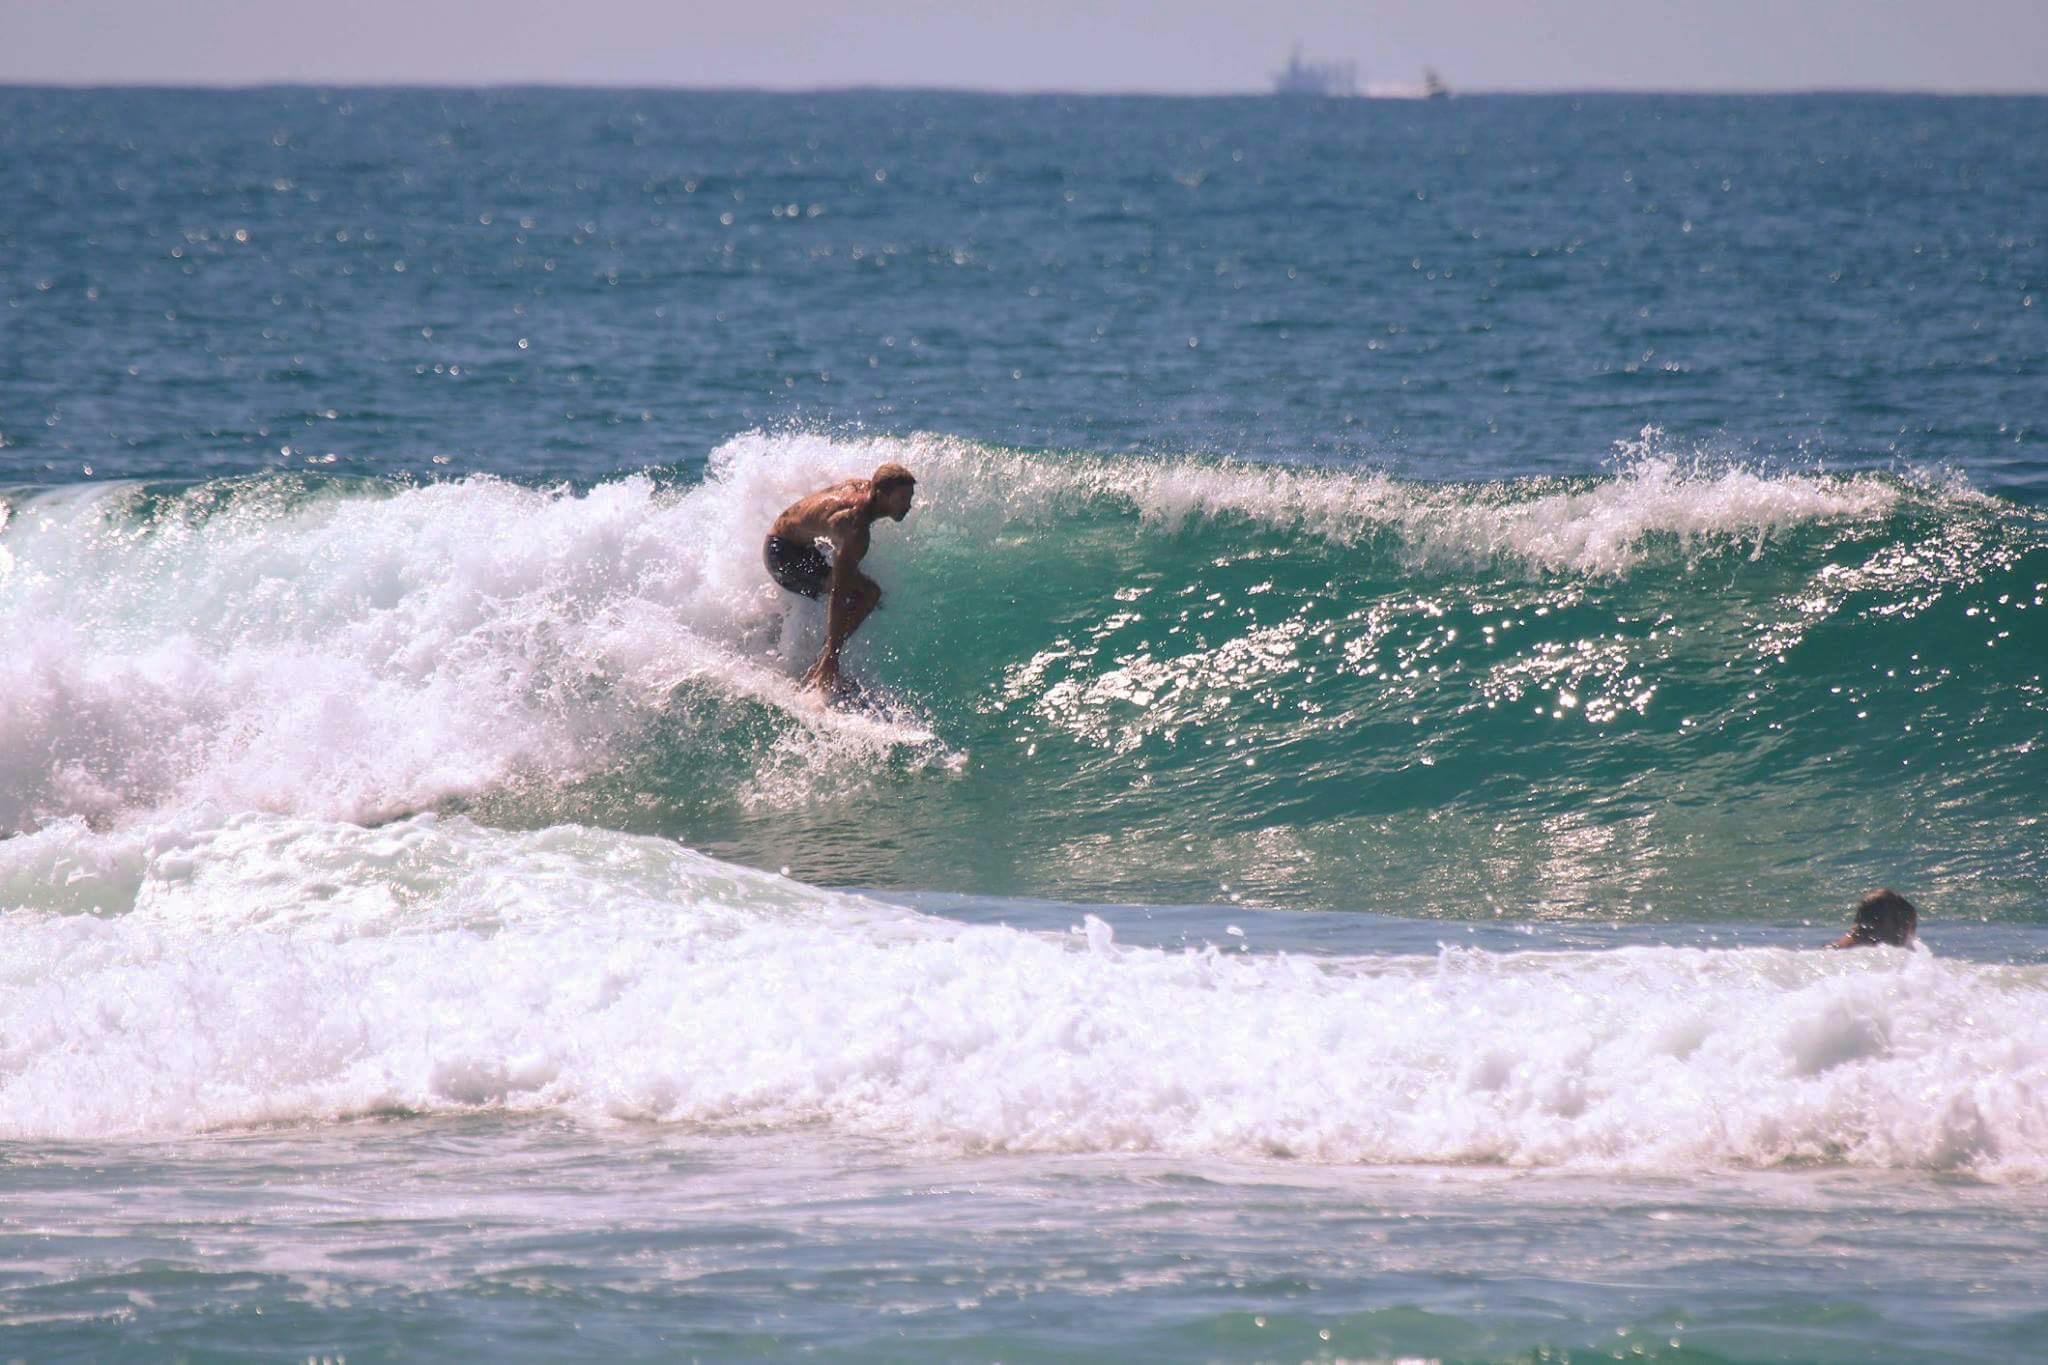 Jorge Abian surfing a wedge in Lanzarote